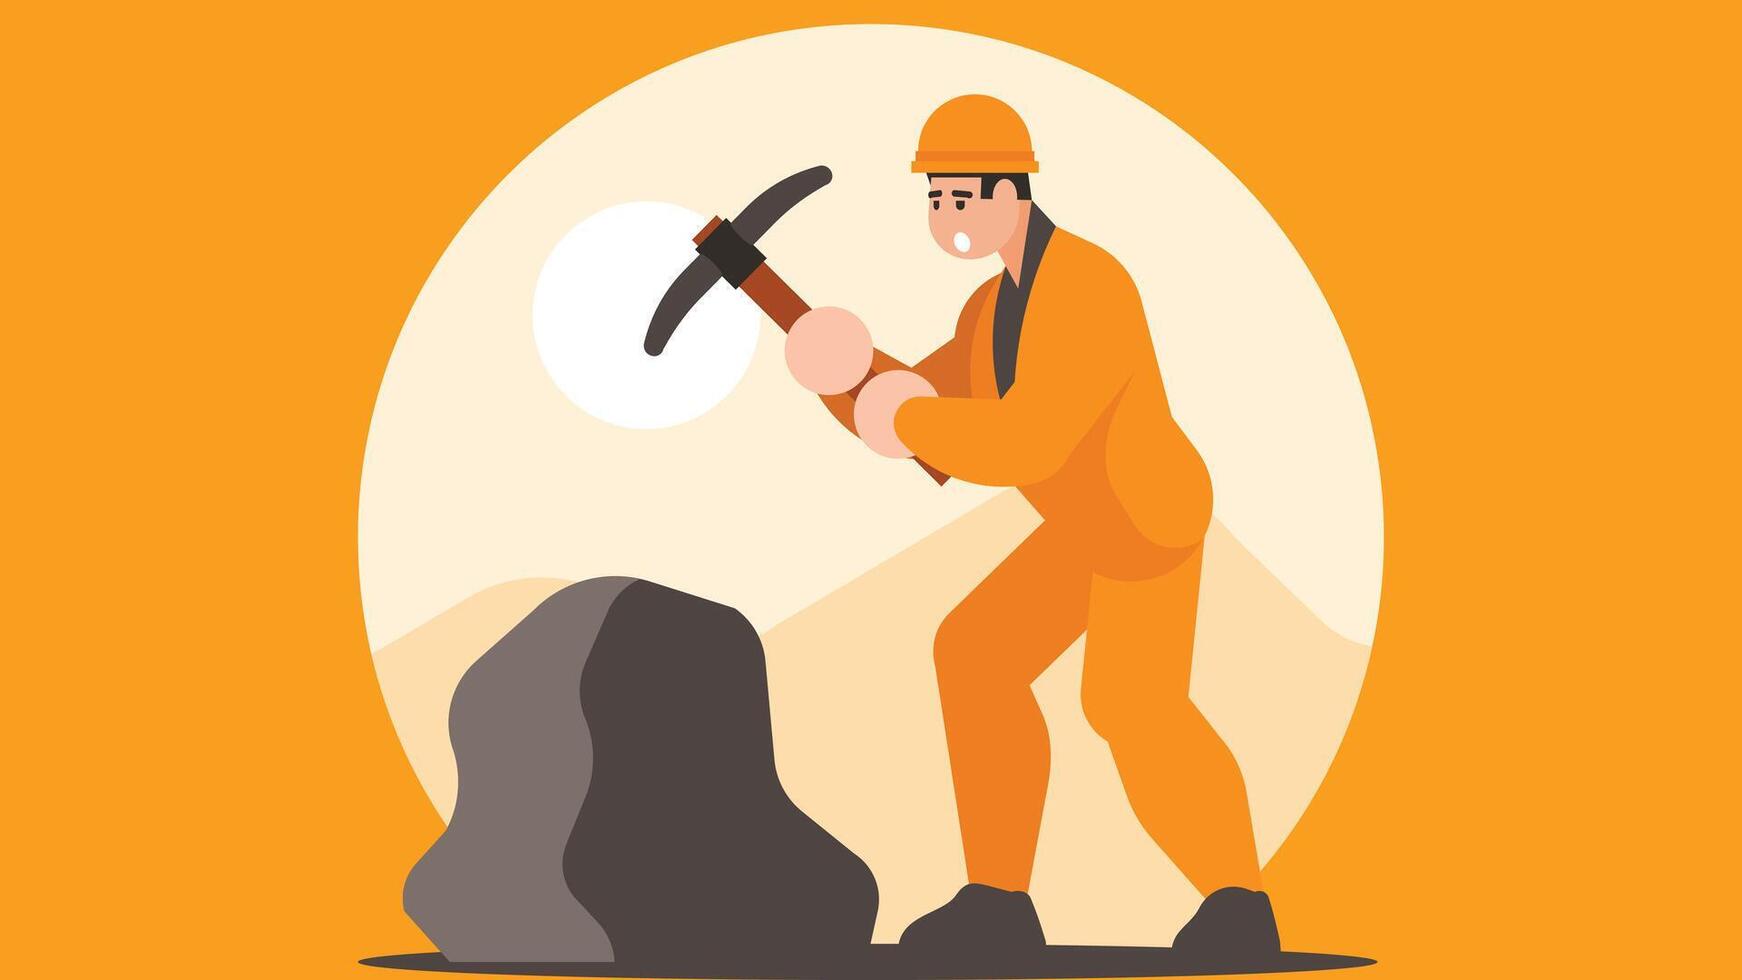 Mining worker clears a block stone in the construction site illustration vector